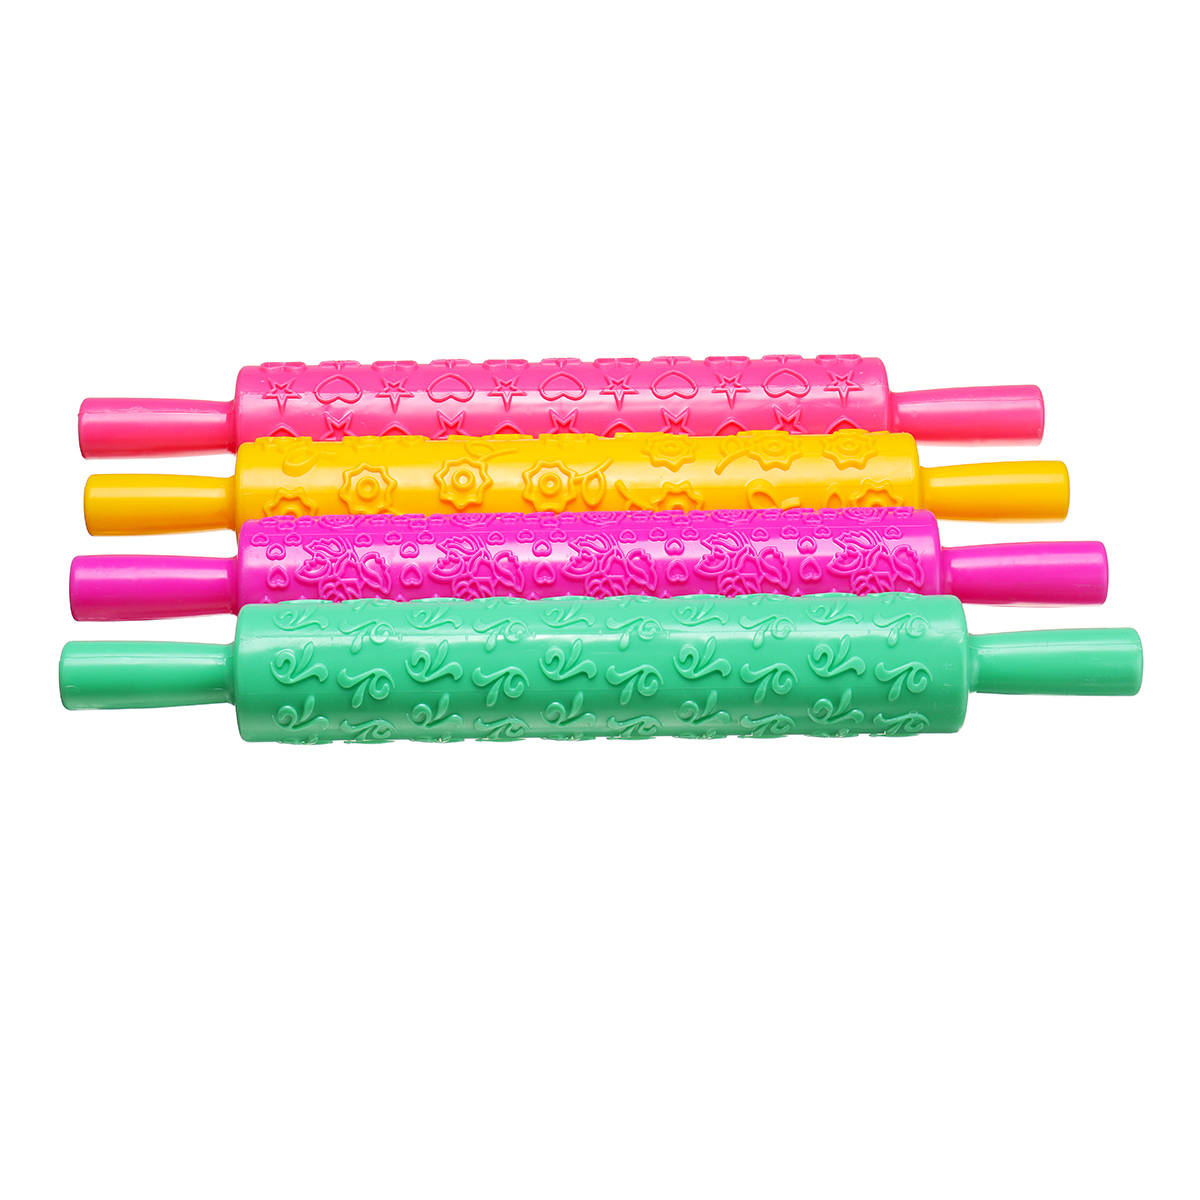 Baking-Rolling-Pin-Christmas-Creative-Baking-Biscuits-Cookie-Rolling-Rod-Pin-Printing-Mold-1410720-6